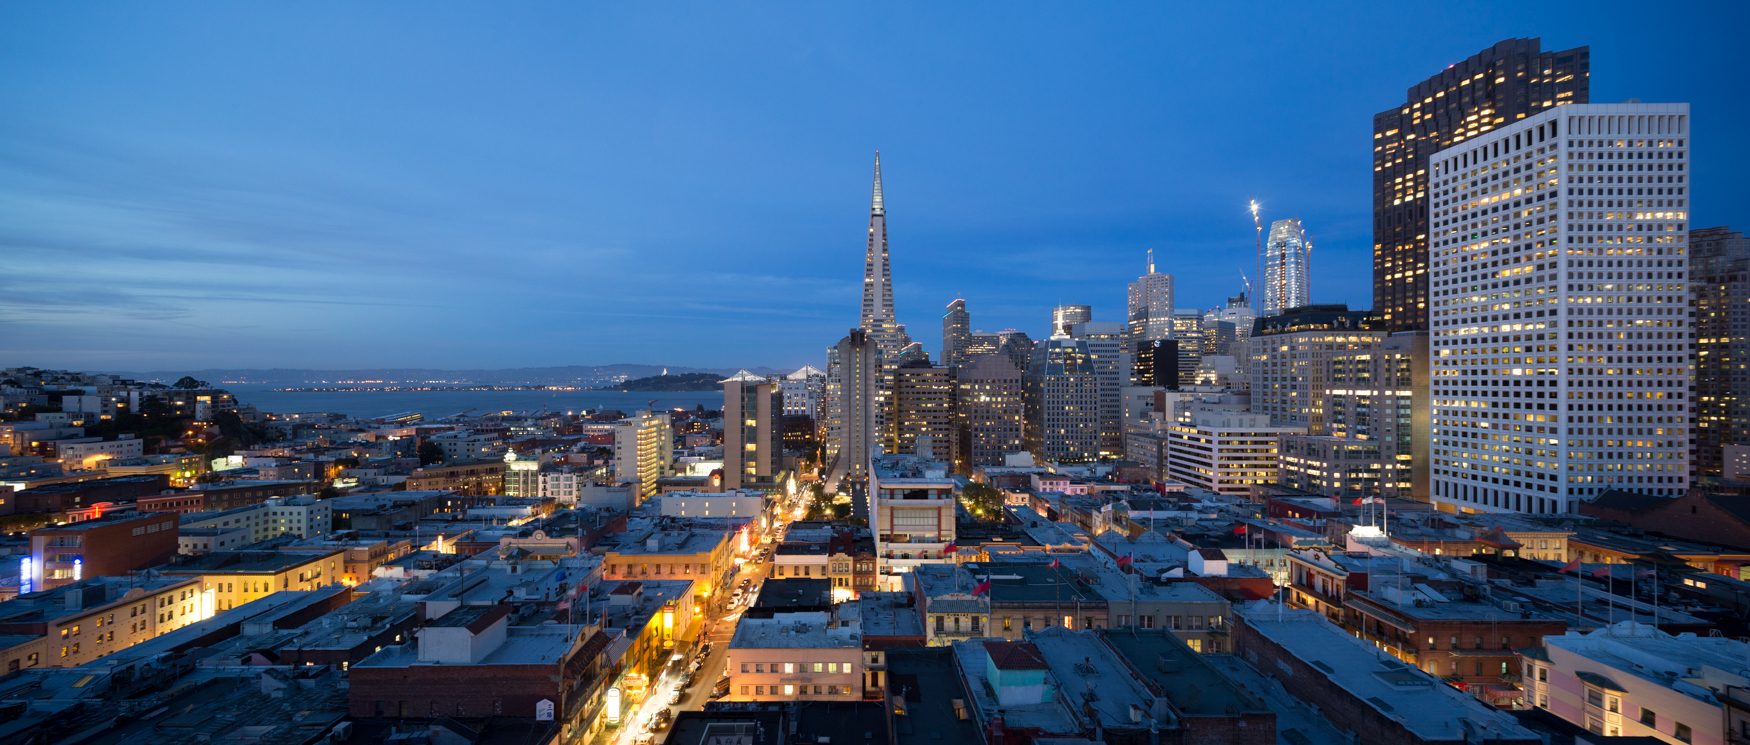 San Francisco Aerial twilight - photographs by brightroomSF Architectural Photography San Francisco-2.jpg